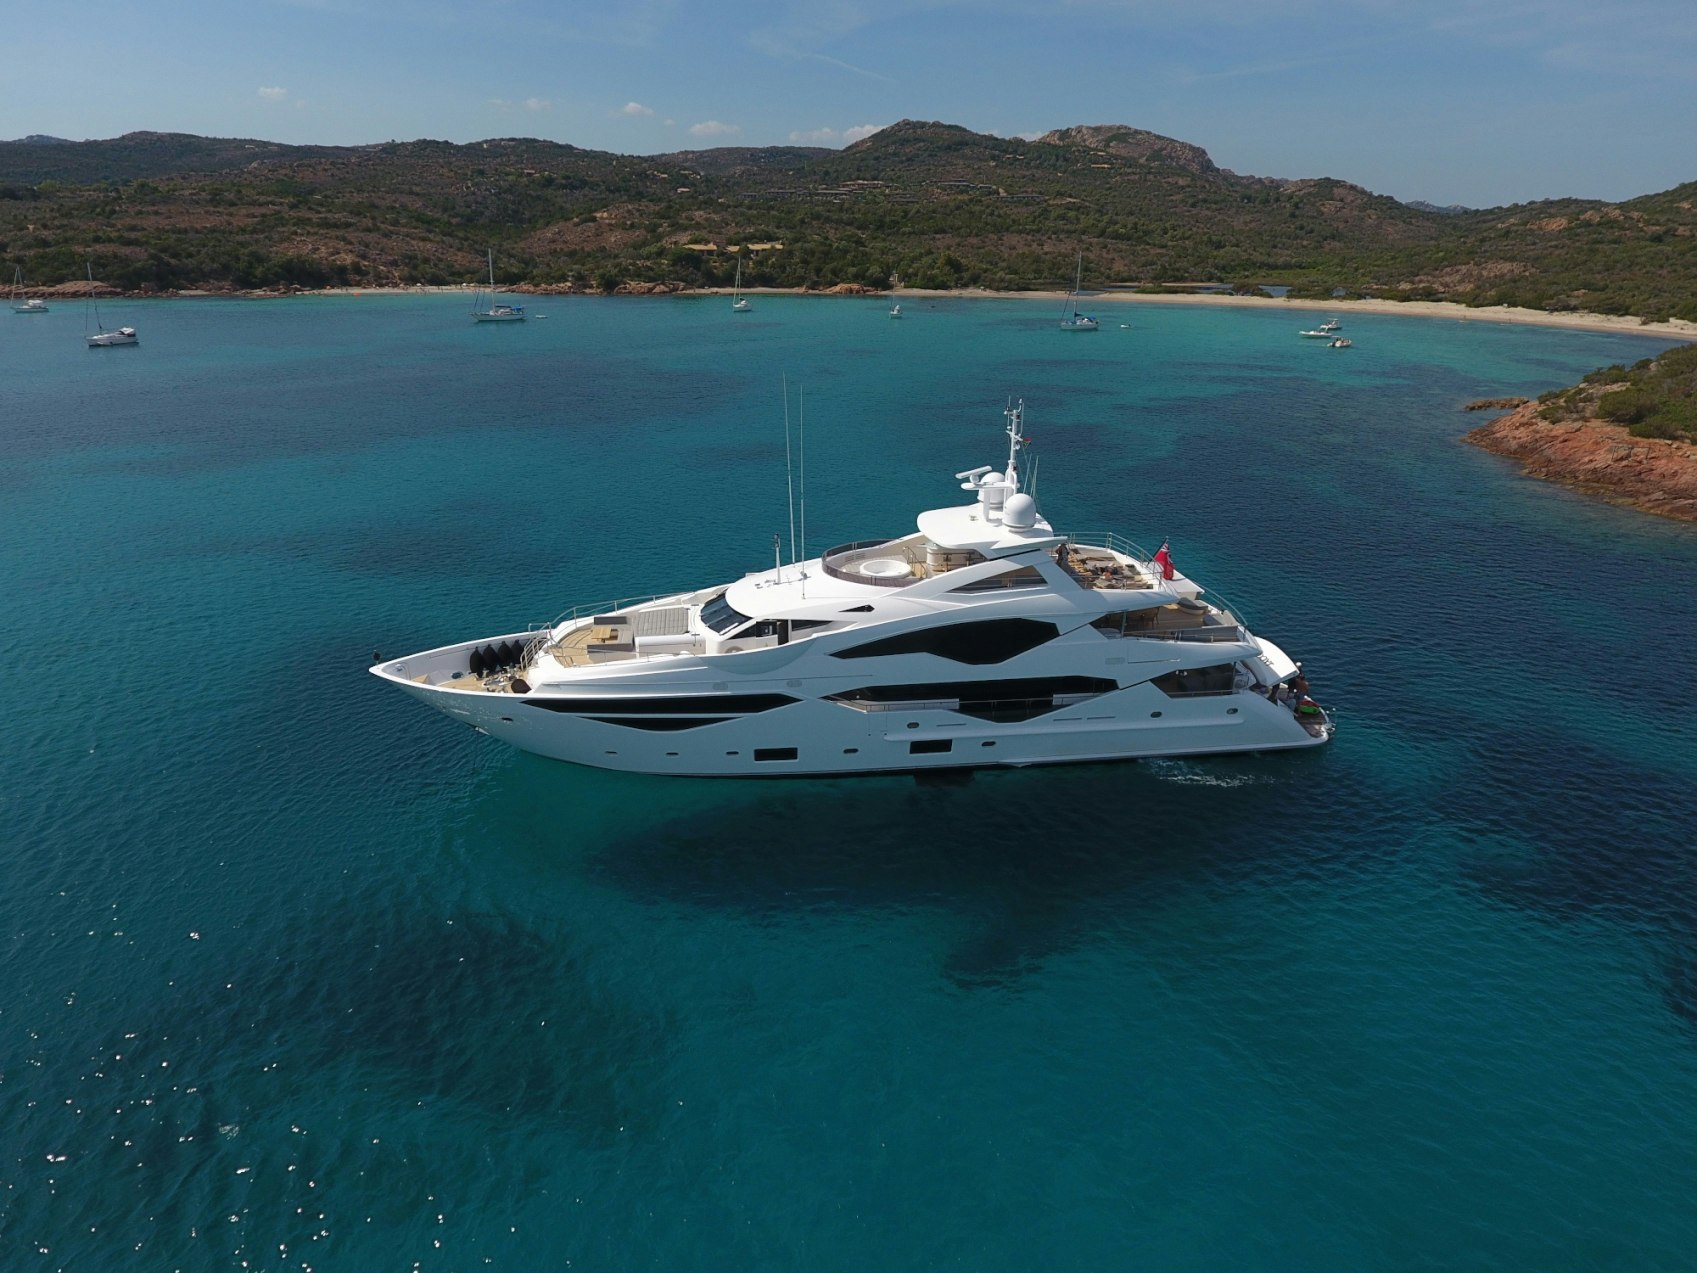 Seasonal Rates for E-MOTION Private Luxury Yacht For Charter